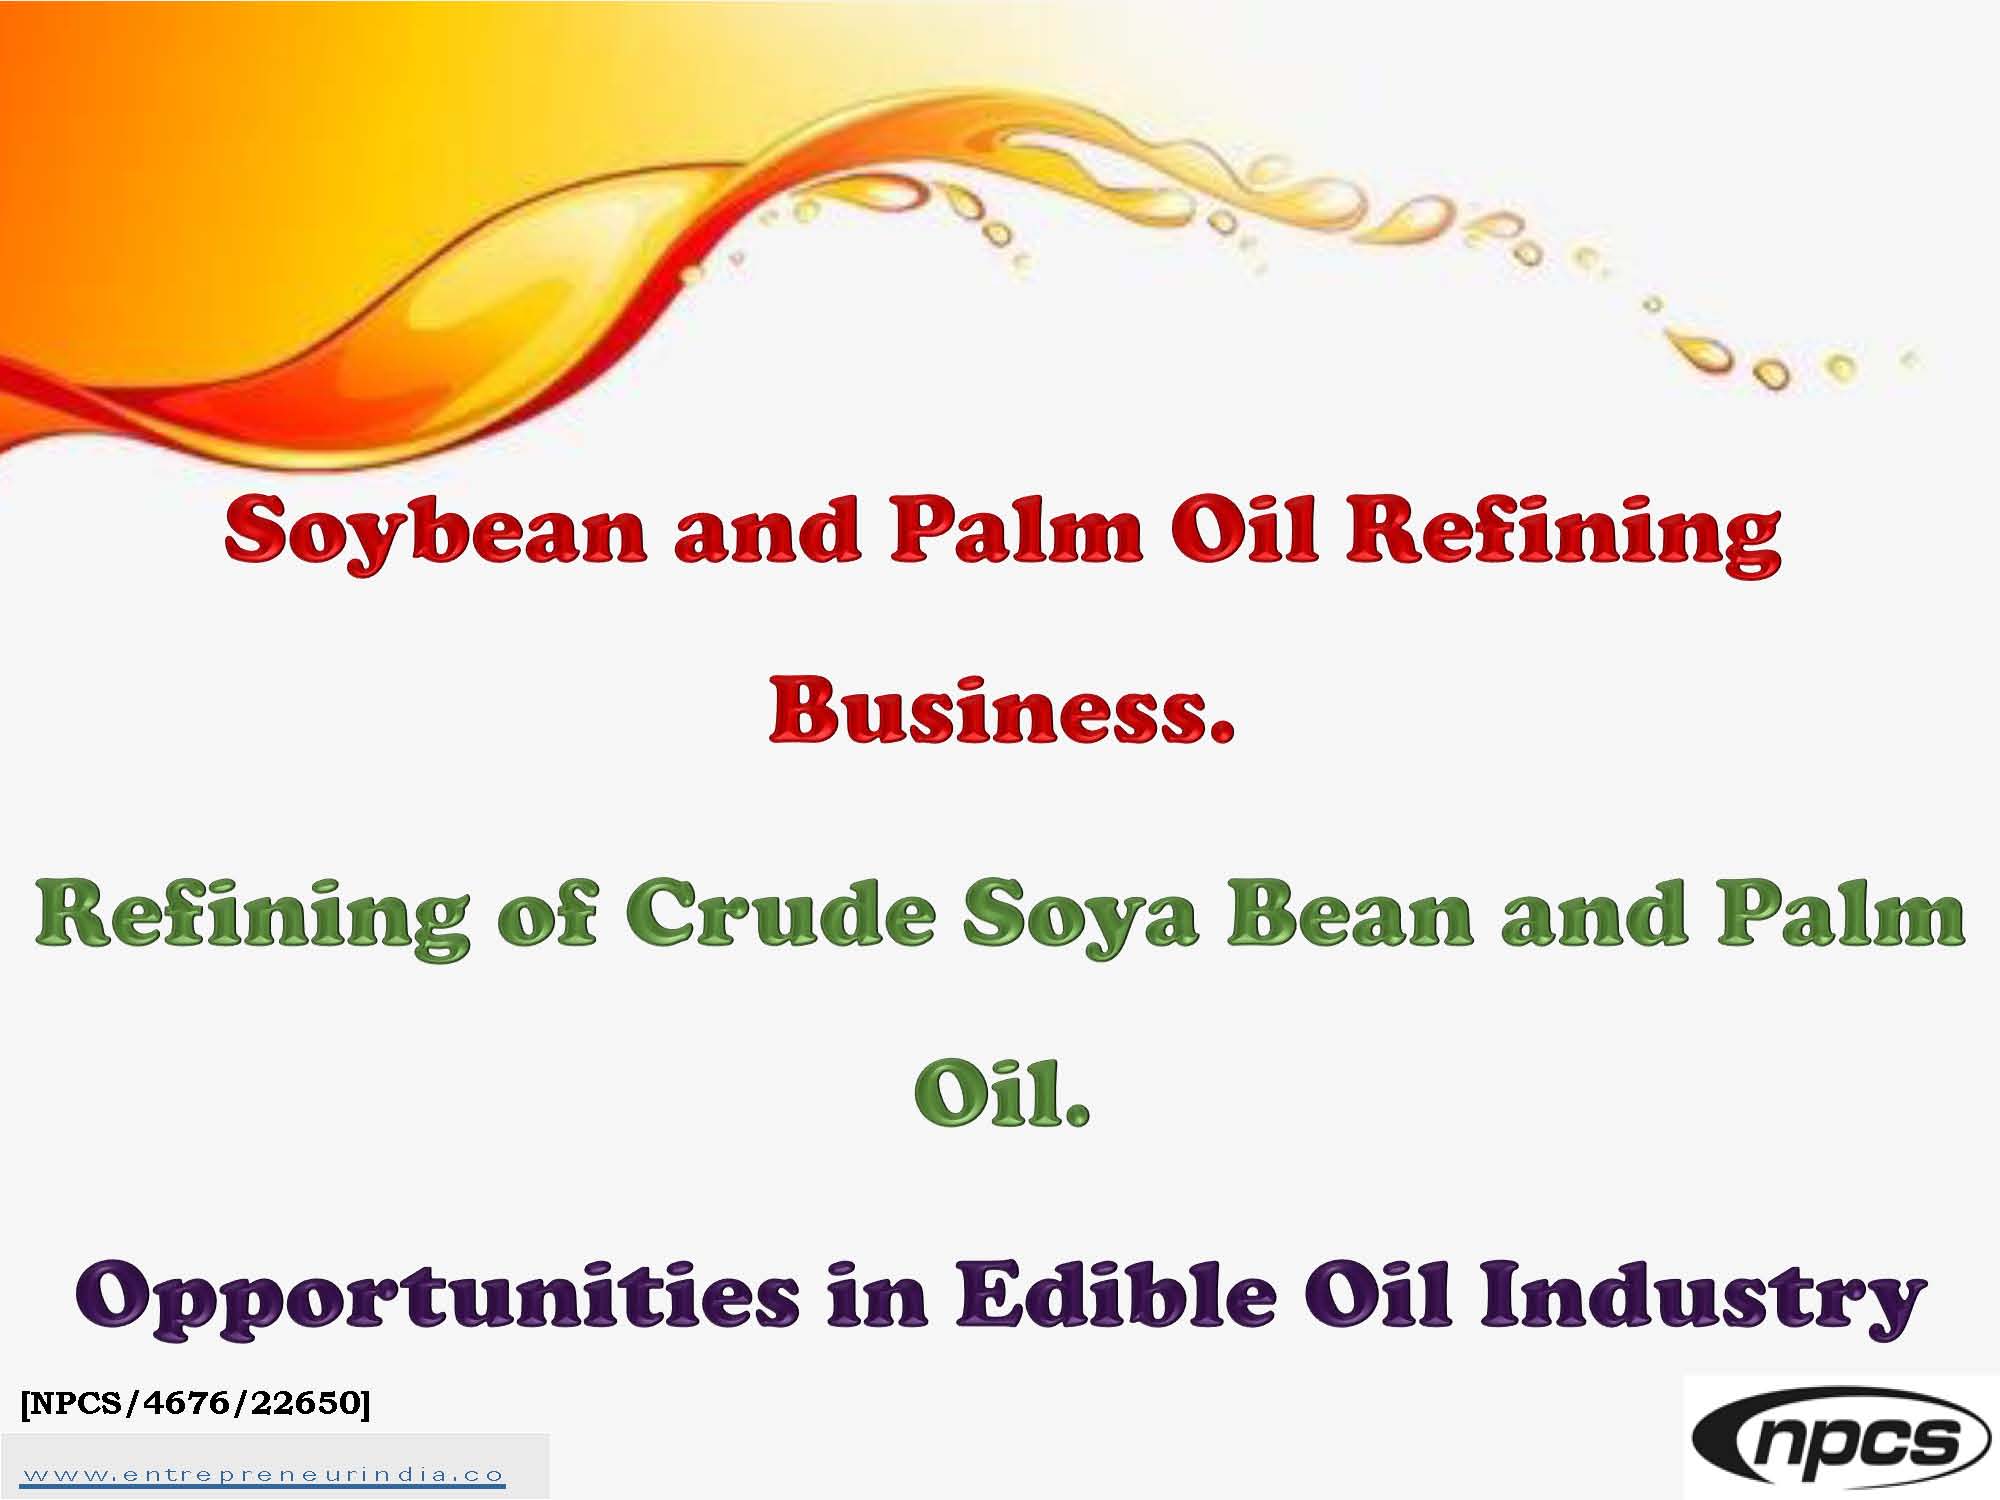 Soybean and Palm Oil Refining Business